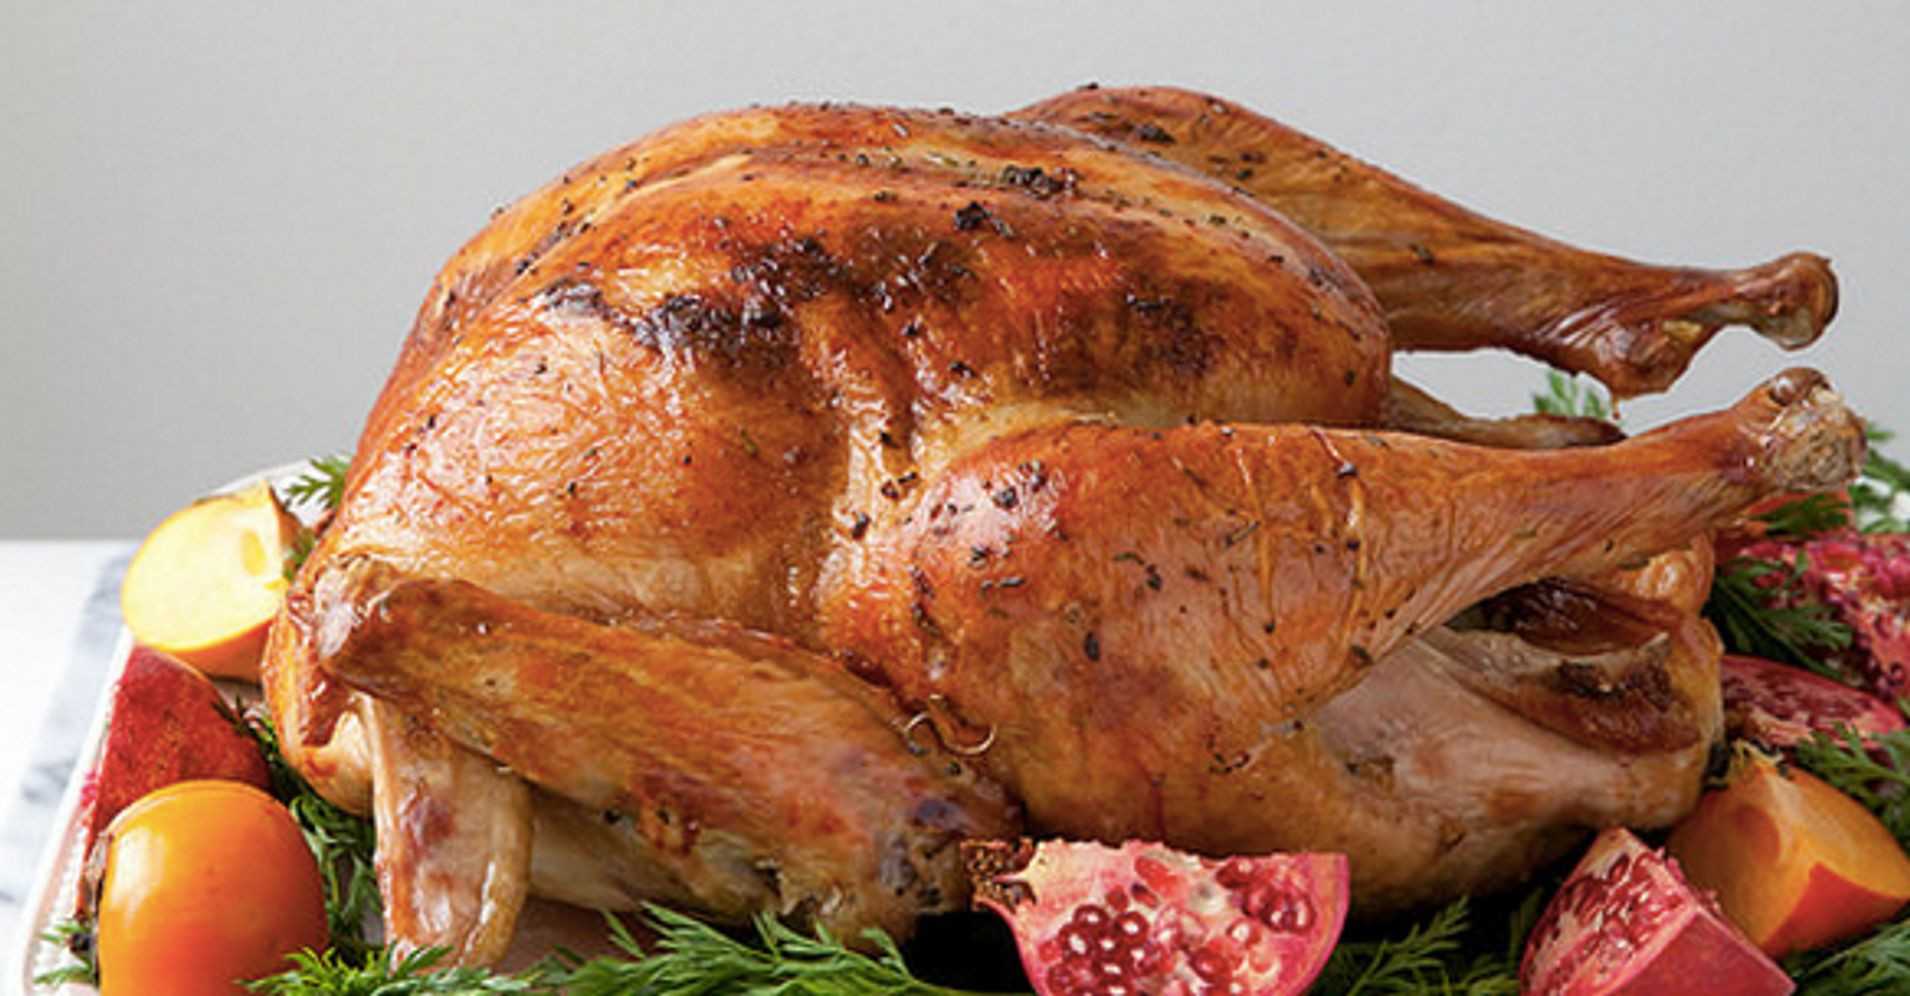 Best Turkey Brands To Buy For Thanksgiving
 The Best Turkey Recipes For Thanksgiving